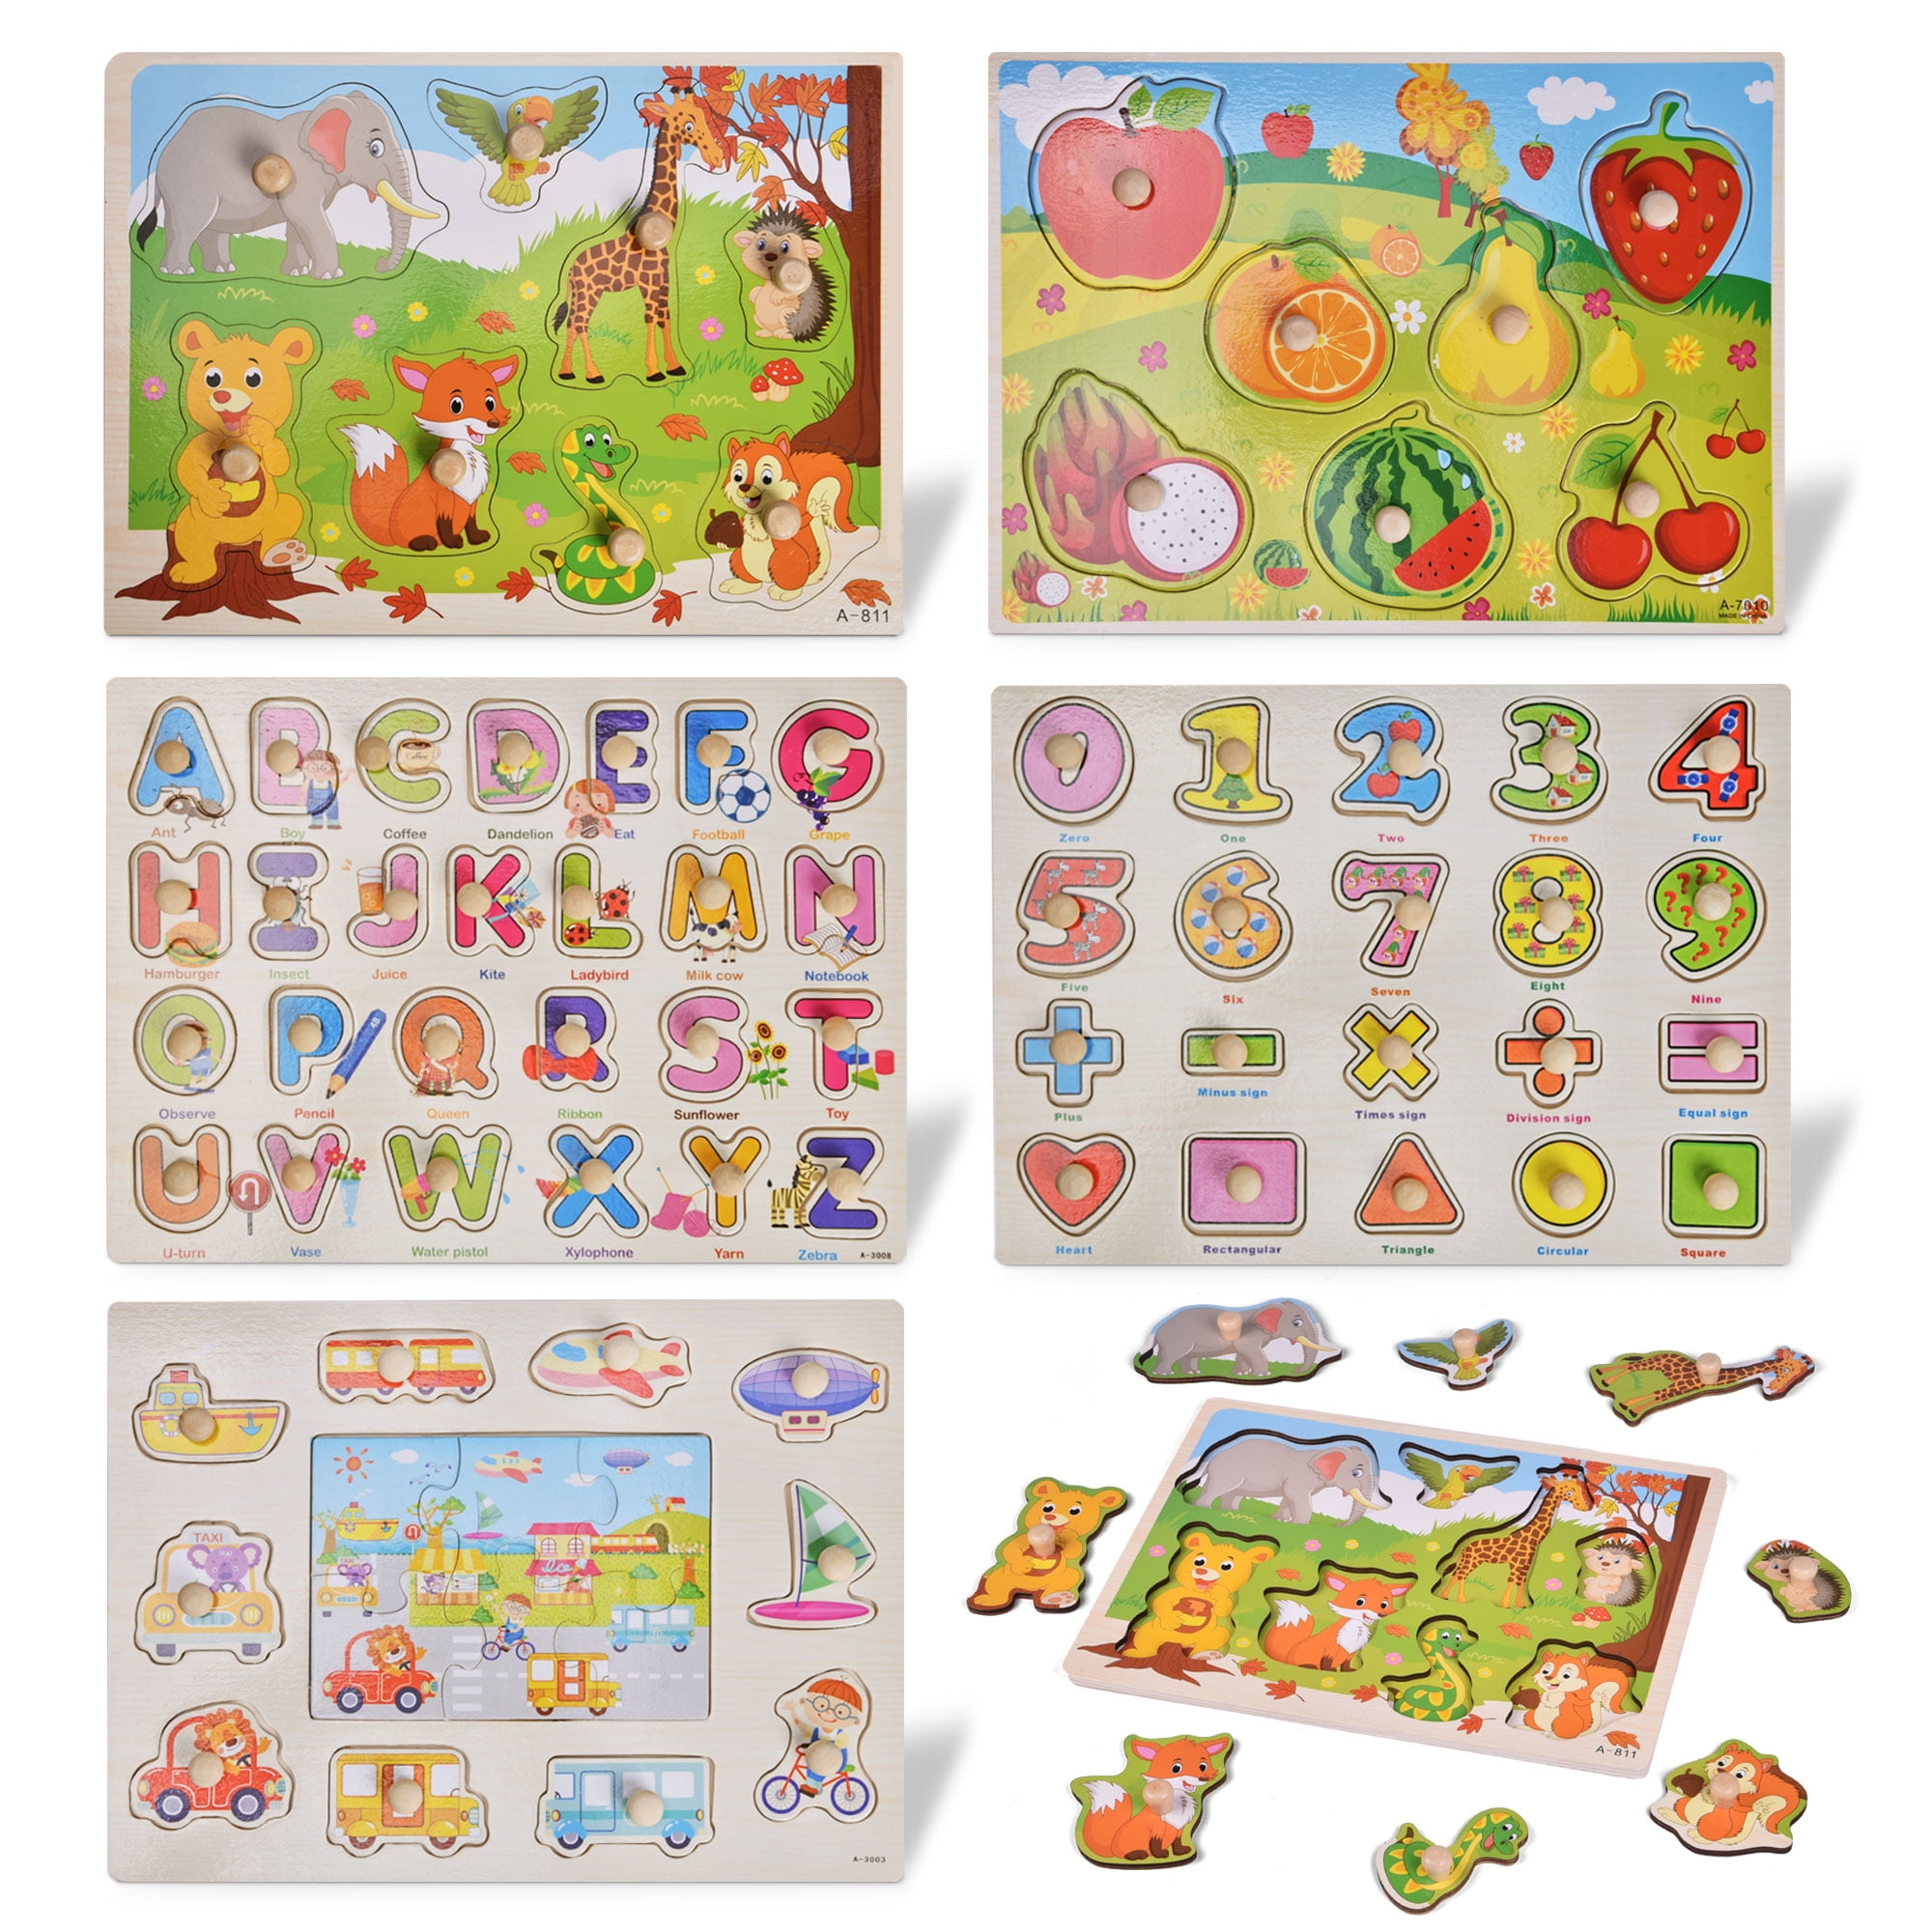 Wood Works Alphabet Wooden Educational Letter and Number Peg Puzzle 